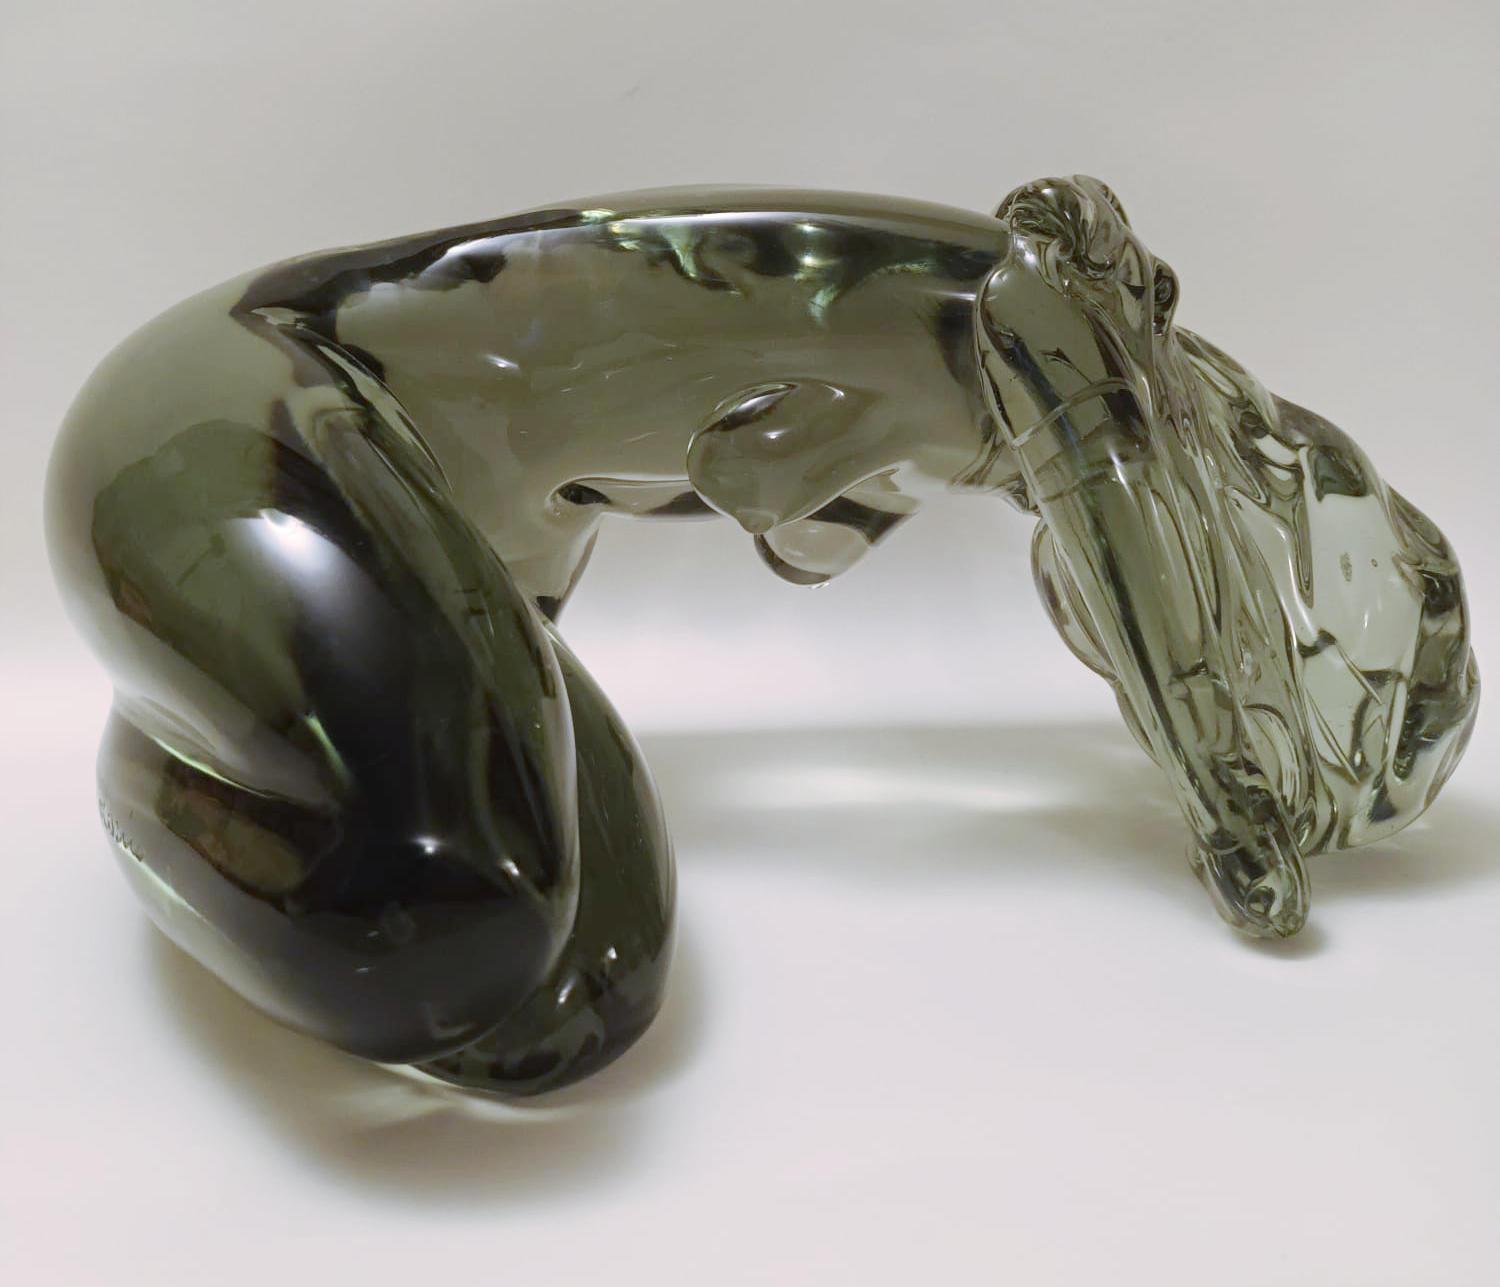 Vintage Italian smoky Murano glass sculpture depicting a woman with her head in her hands in a keeling position. 
It is made of solid glass, hand polished by Loredano Rosin / Made in Italy in 1970s
Original diamond-pointed signature on the